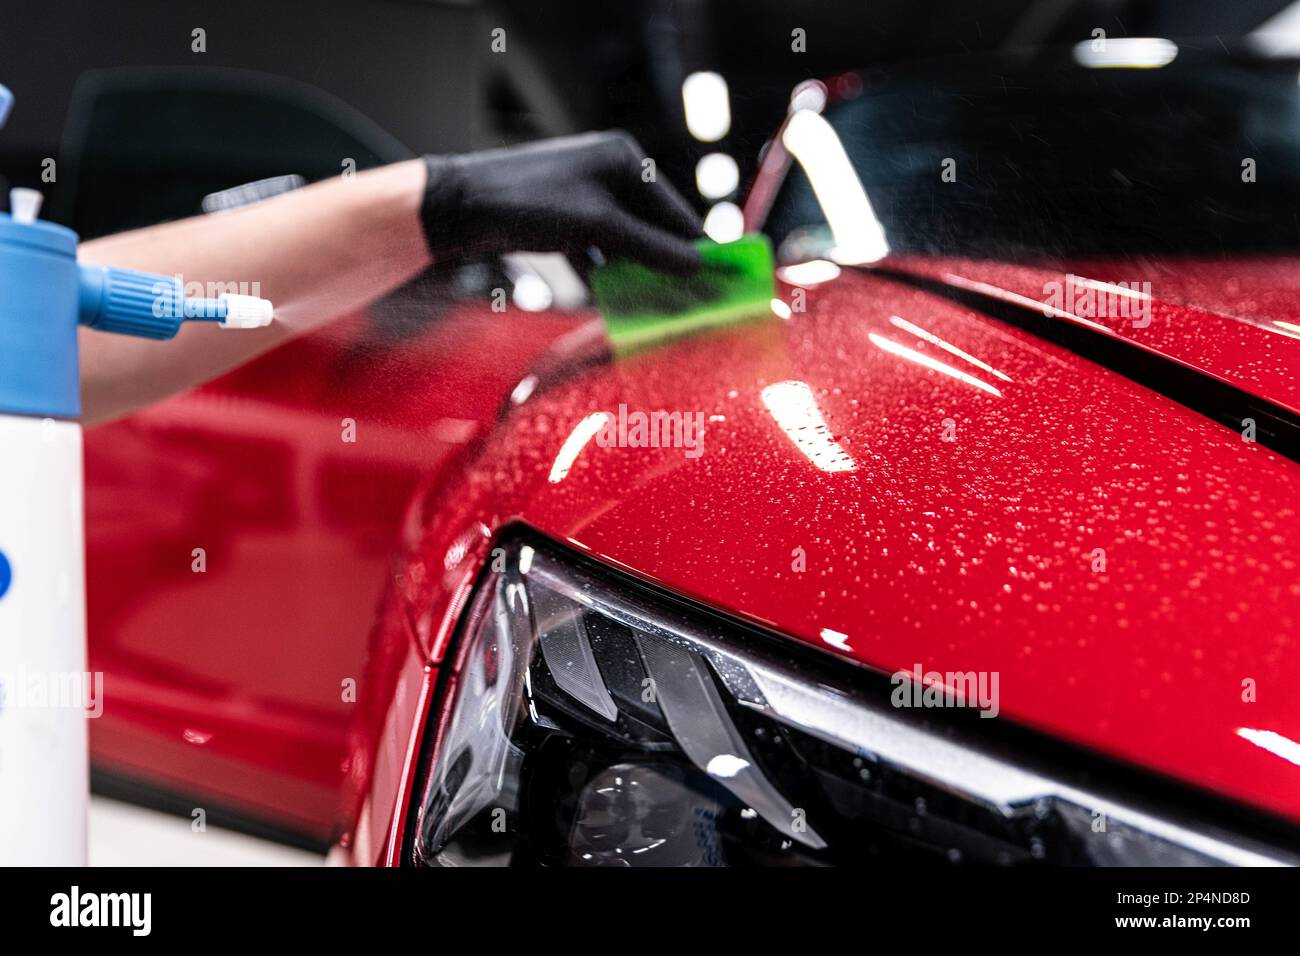 Application of a colorless protective film at a car detailing studio or car wash.  Stock Photo